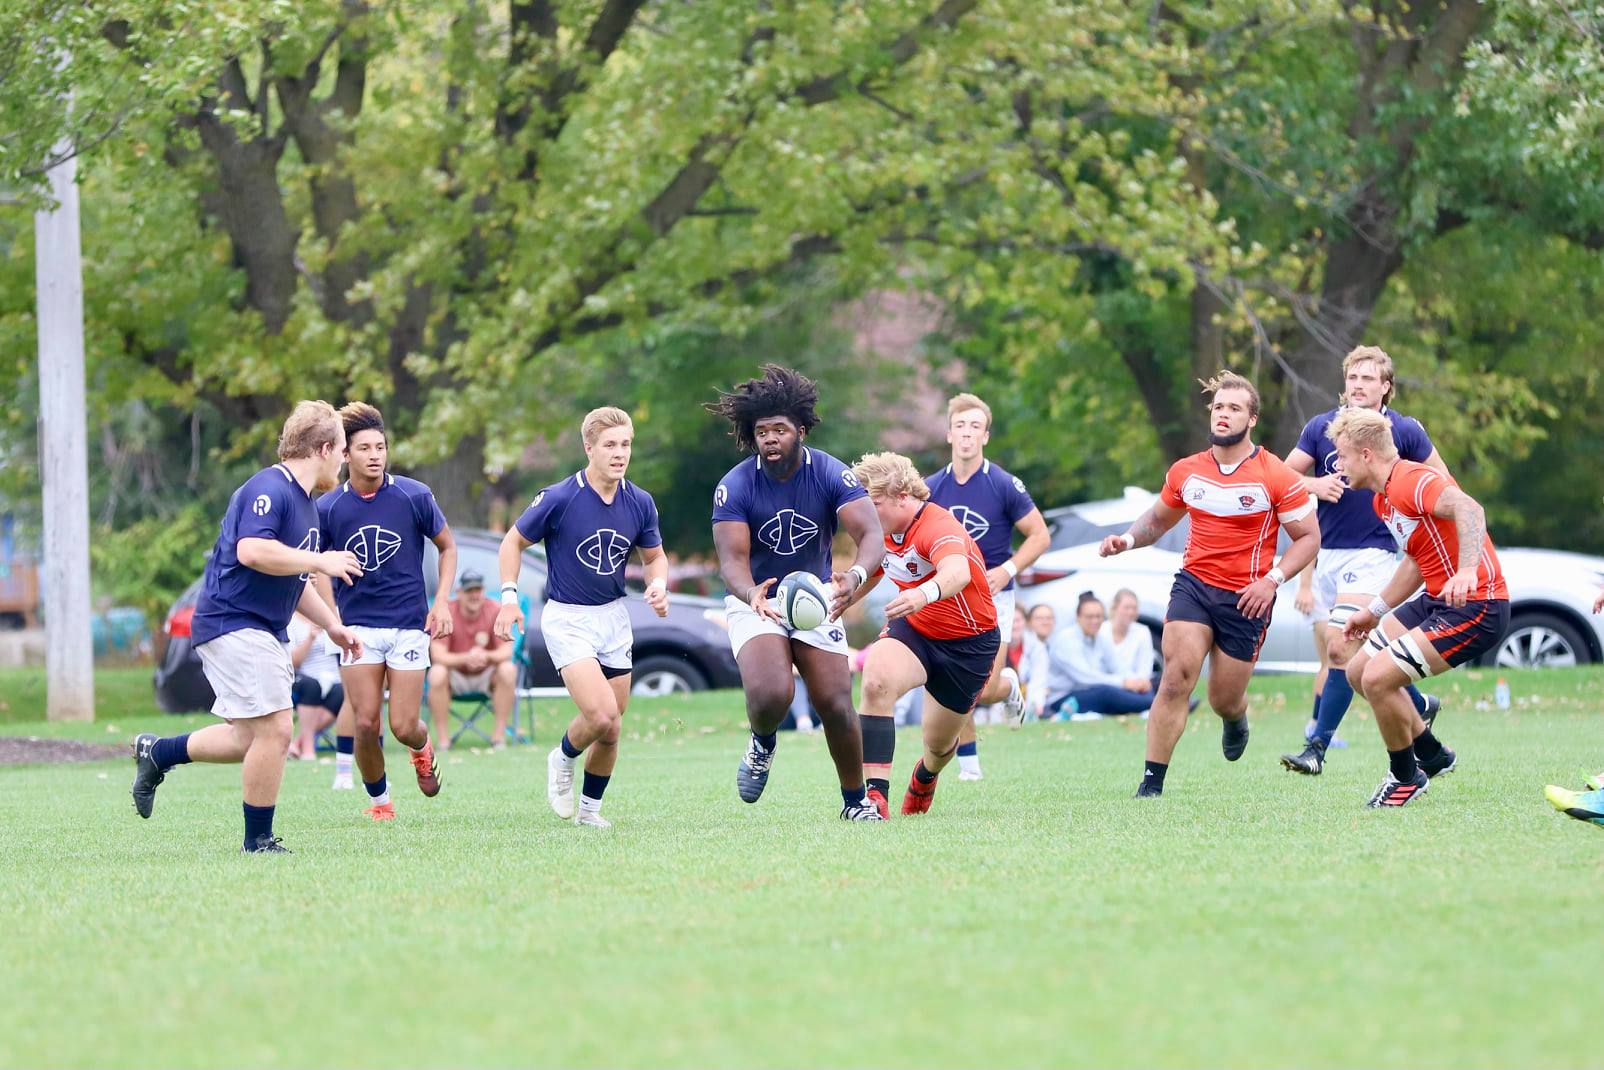 Final home match for Iowa Central rugby Saturday